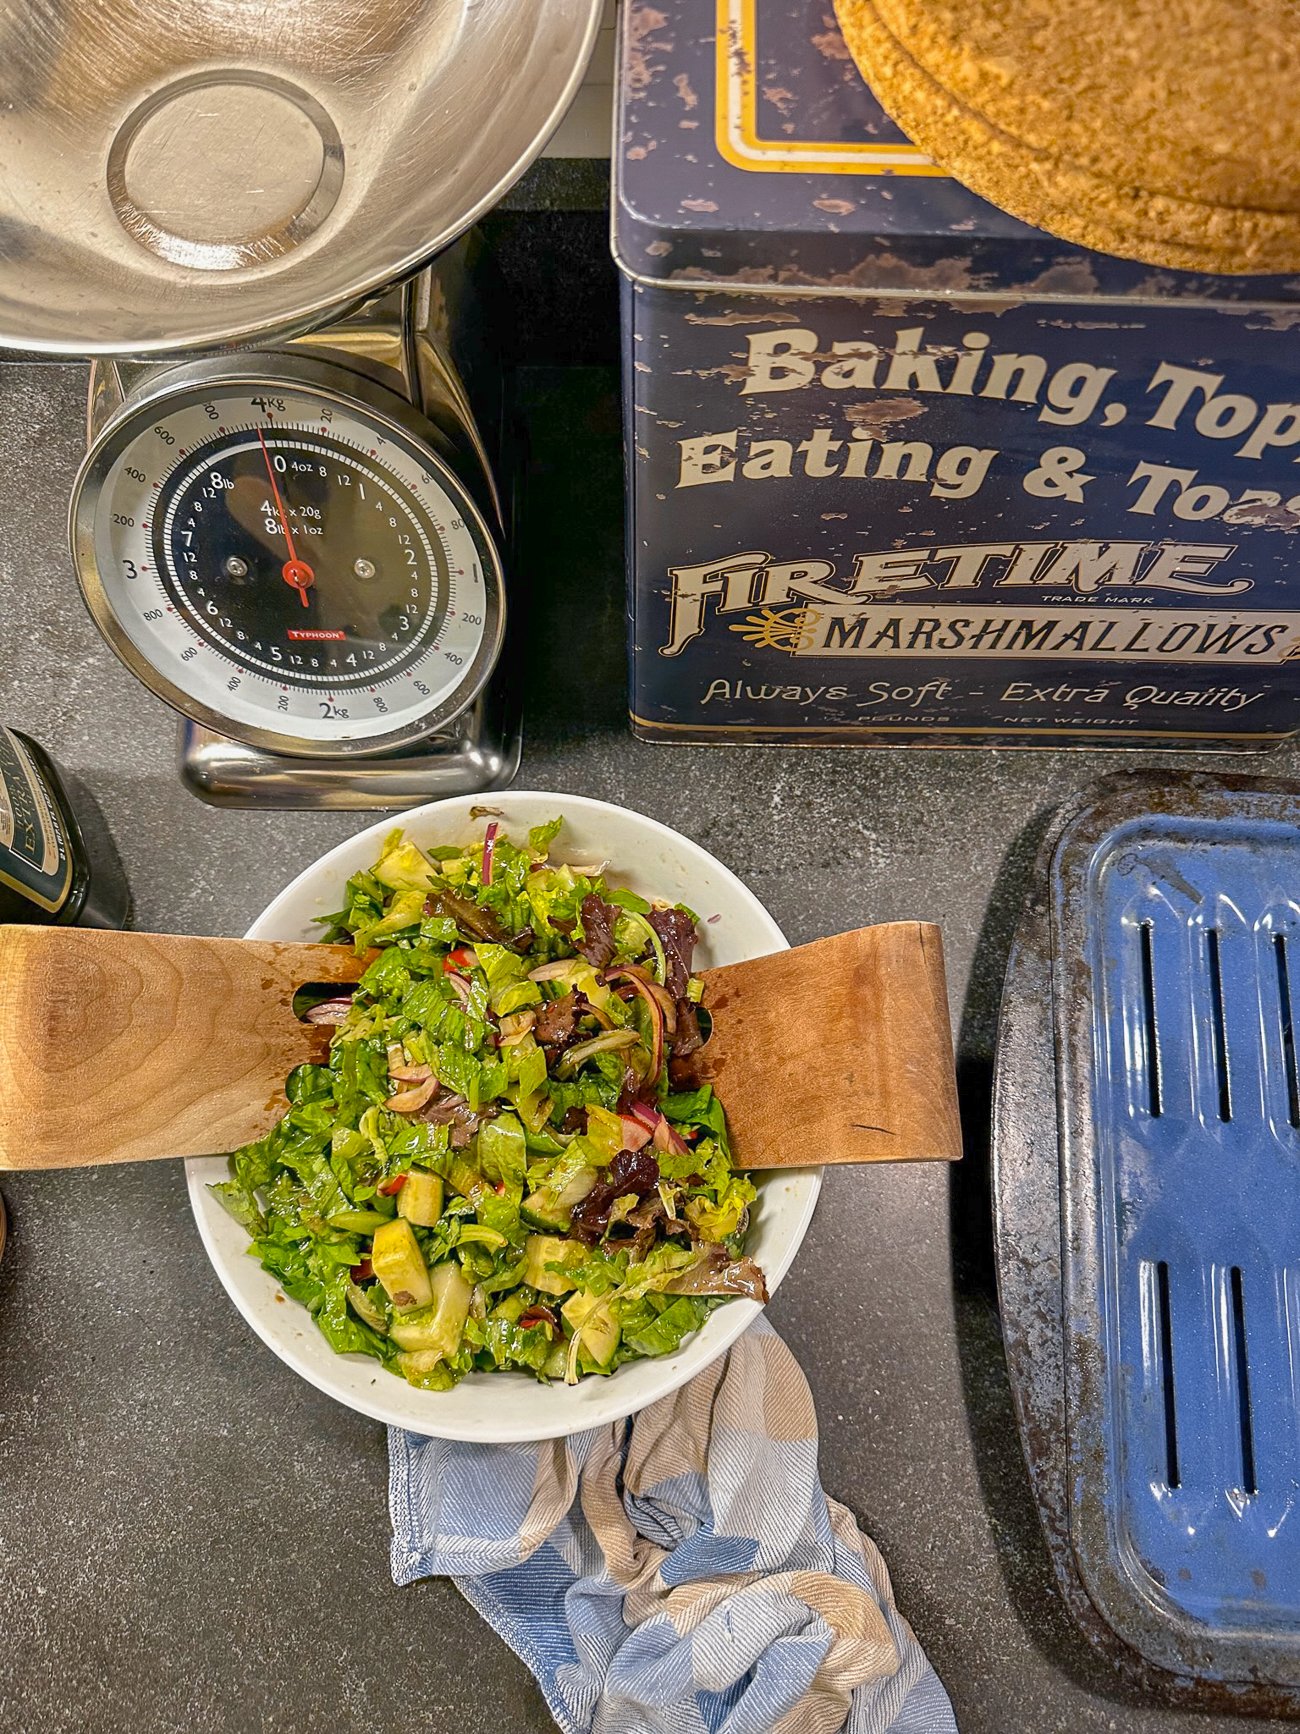 A salad on the counter with a Marshmallow tin and blue kitchen towel and blue metal baking pan